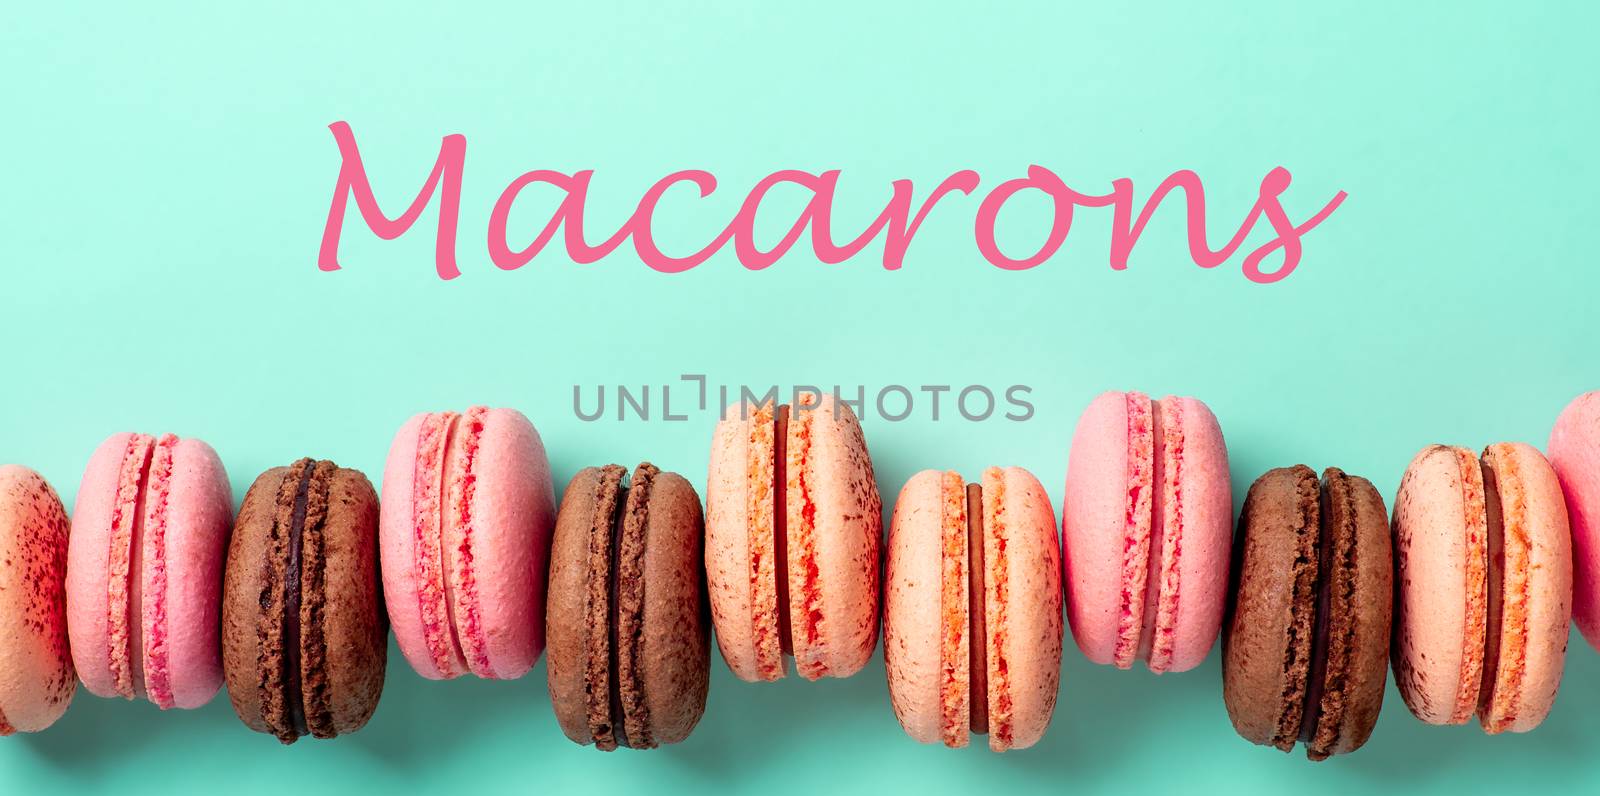 Letters macarons and row of macarons on turquoise by fascinadora